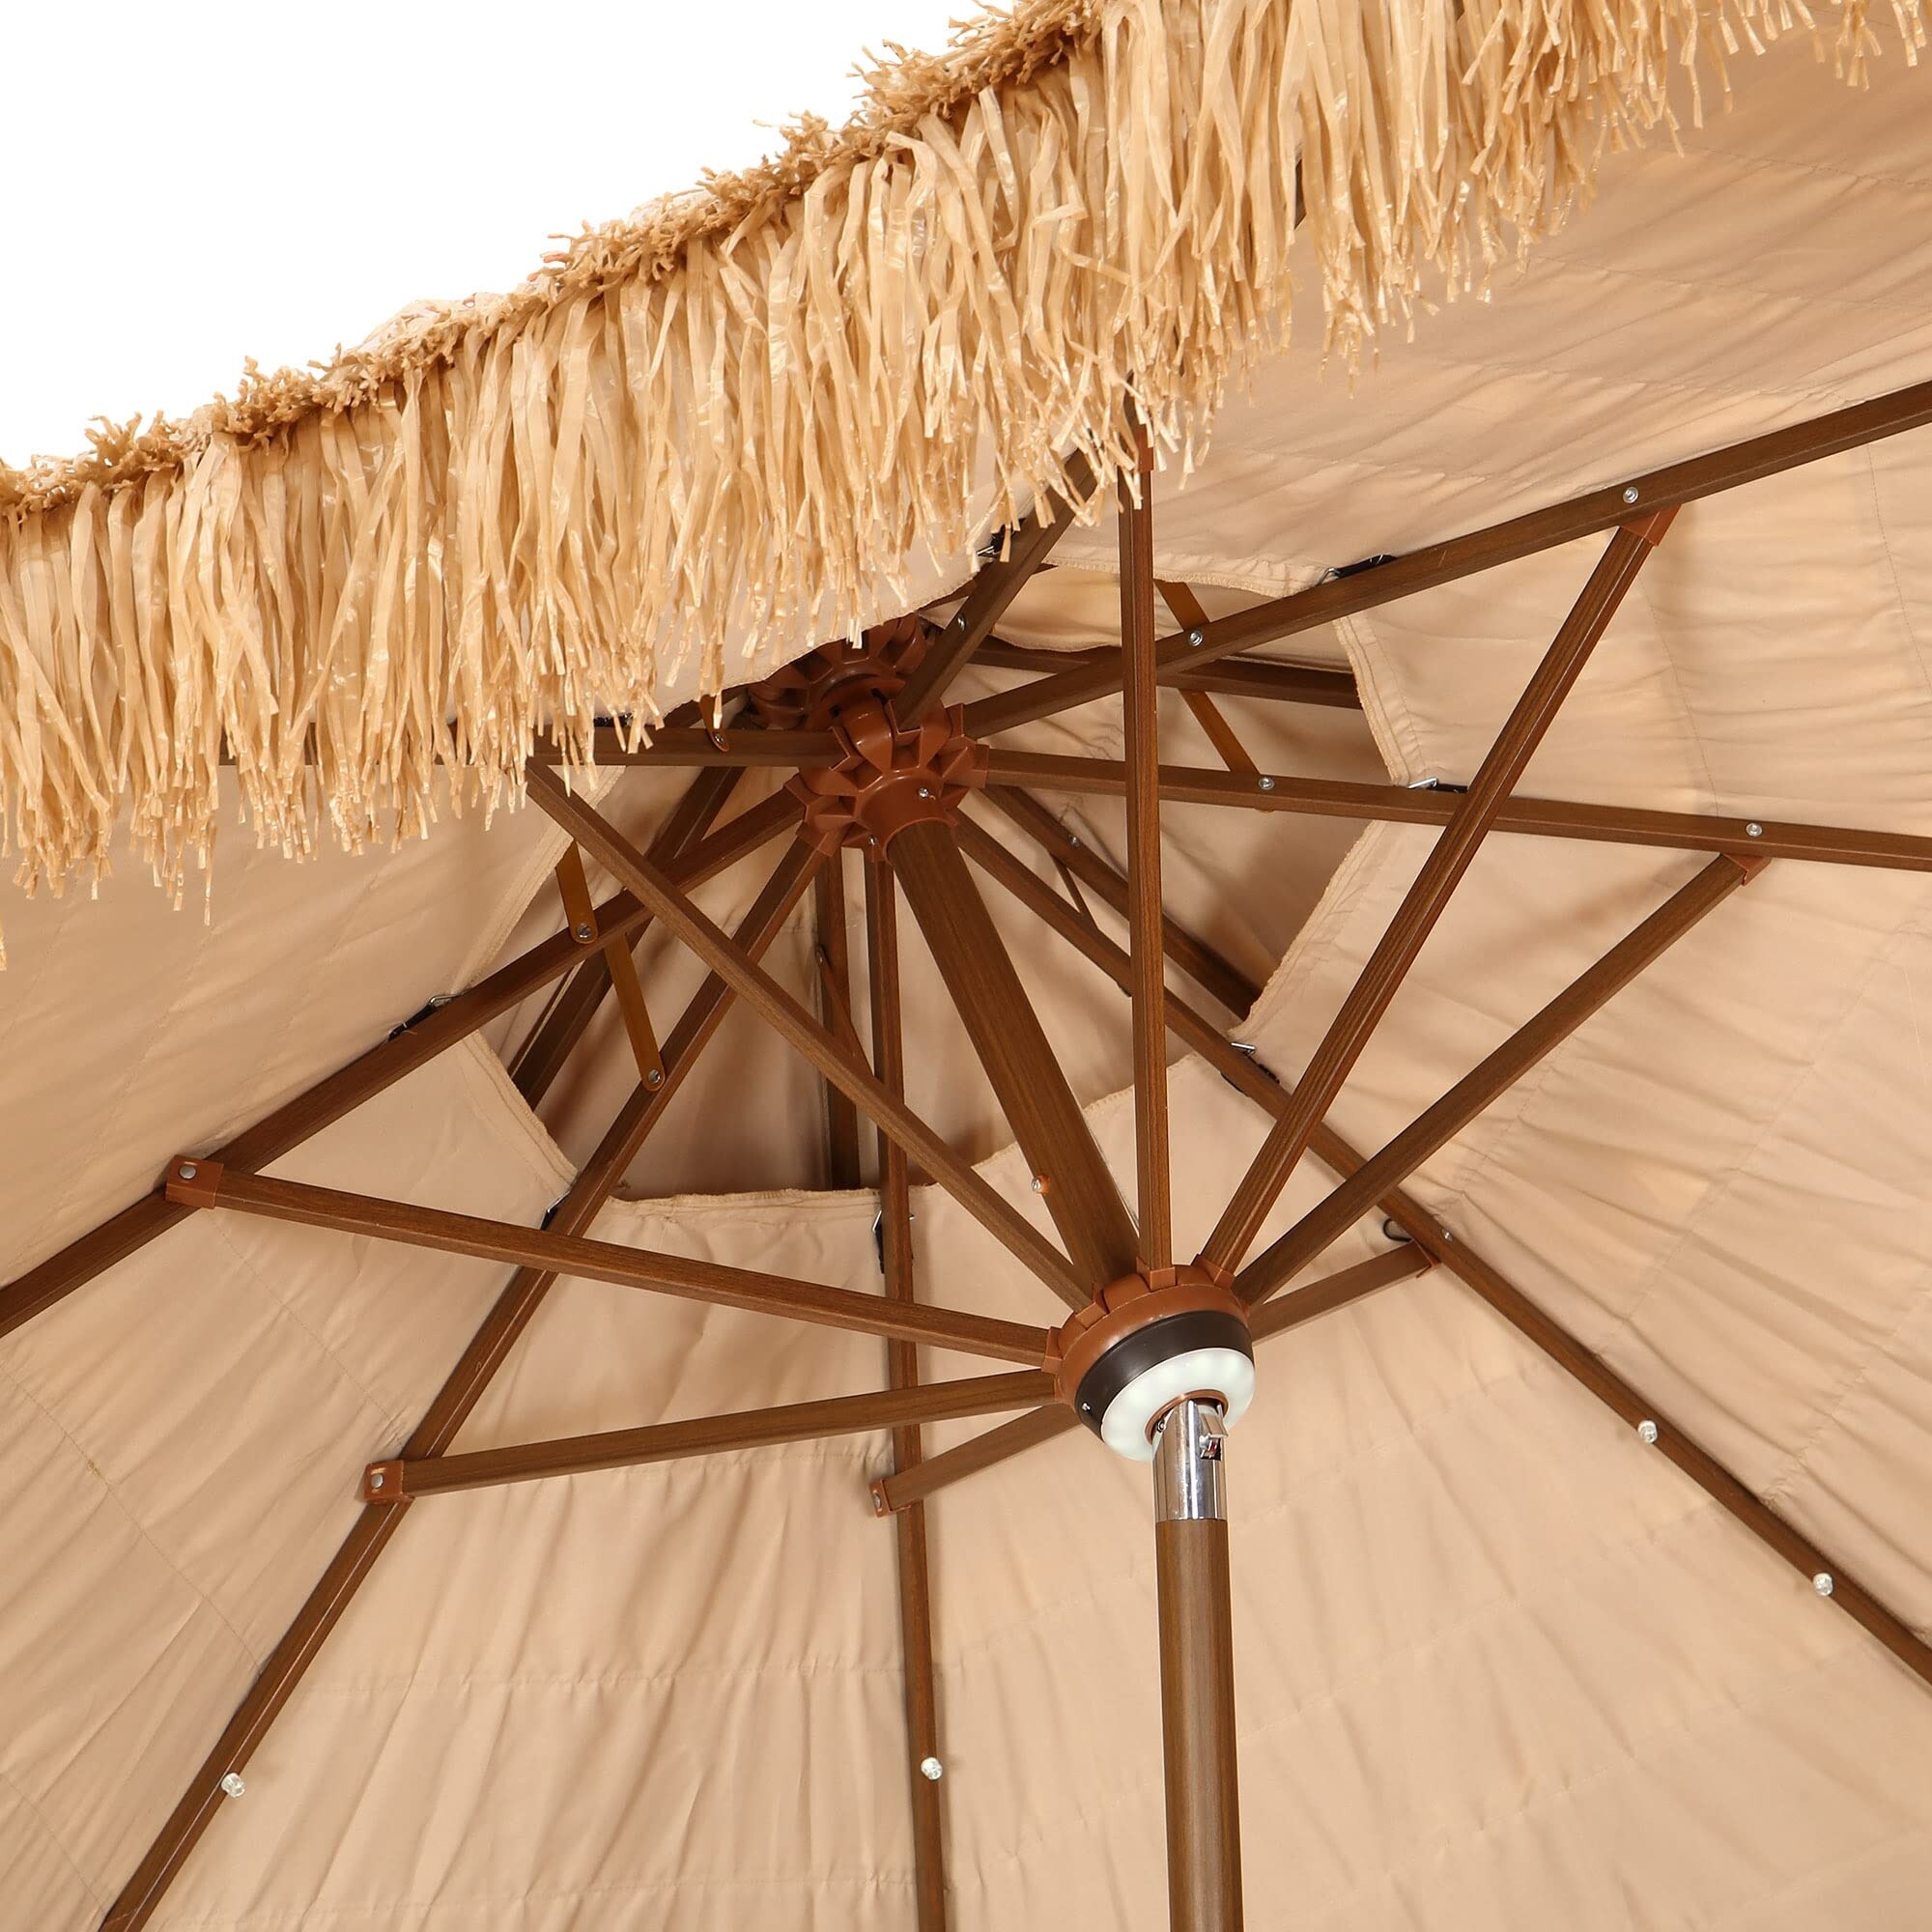 9FT Double Top Solar Thatched Umbrella w/wo Light Patio Tiki Umbrella with Tilt for Outdoor Pool, Beach, Yard